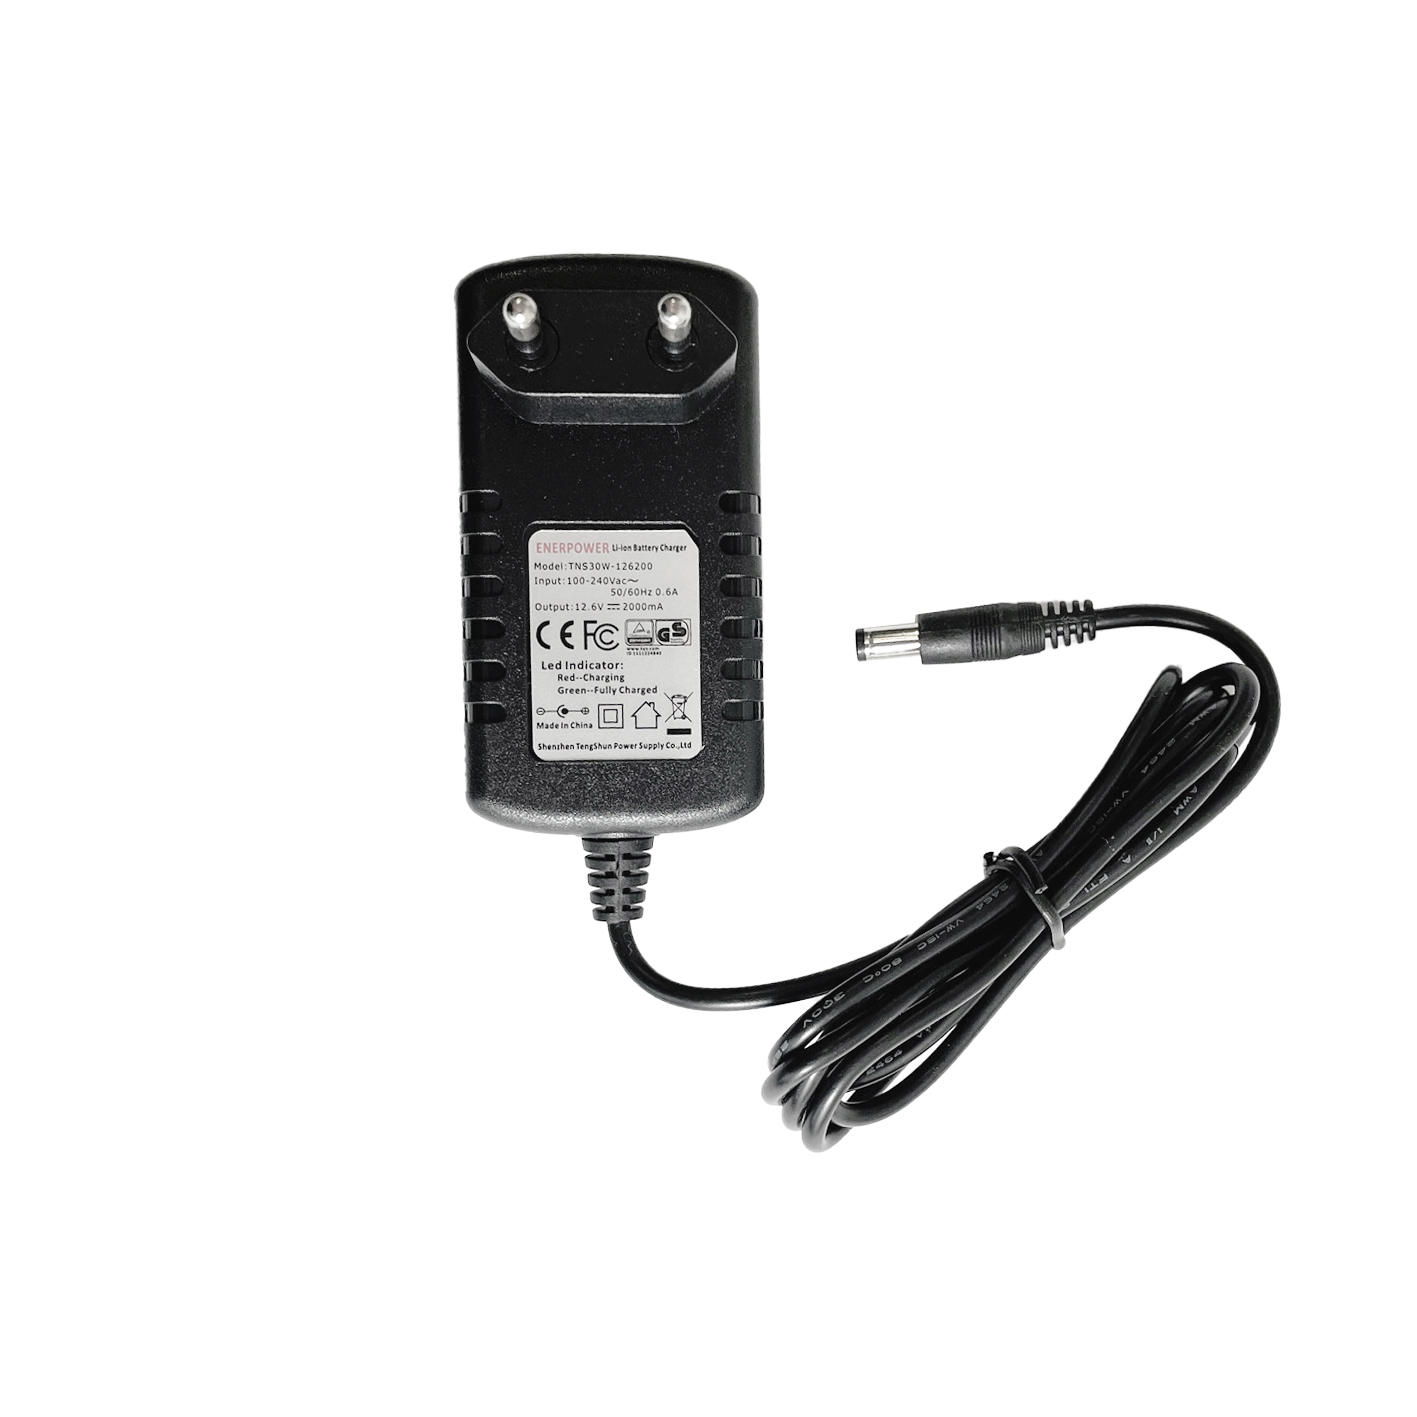 3S Charger for Li-Ion-Batteries 10.8V-11.1 2A Round Plug Wall